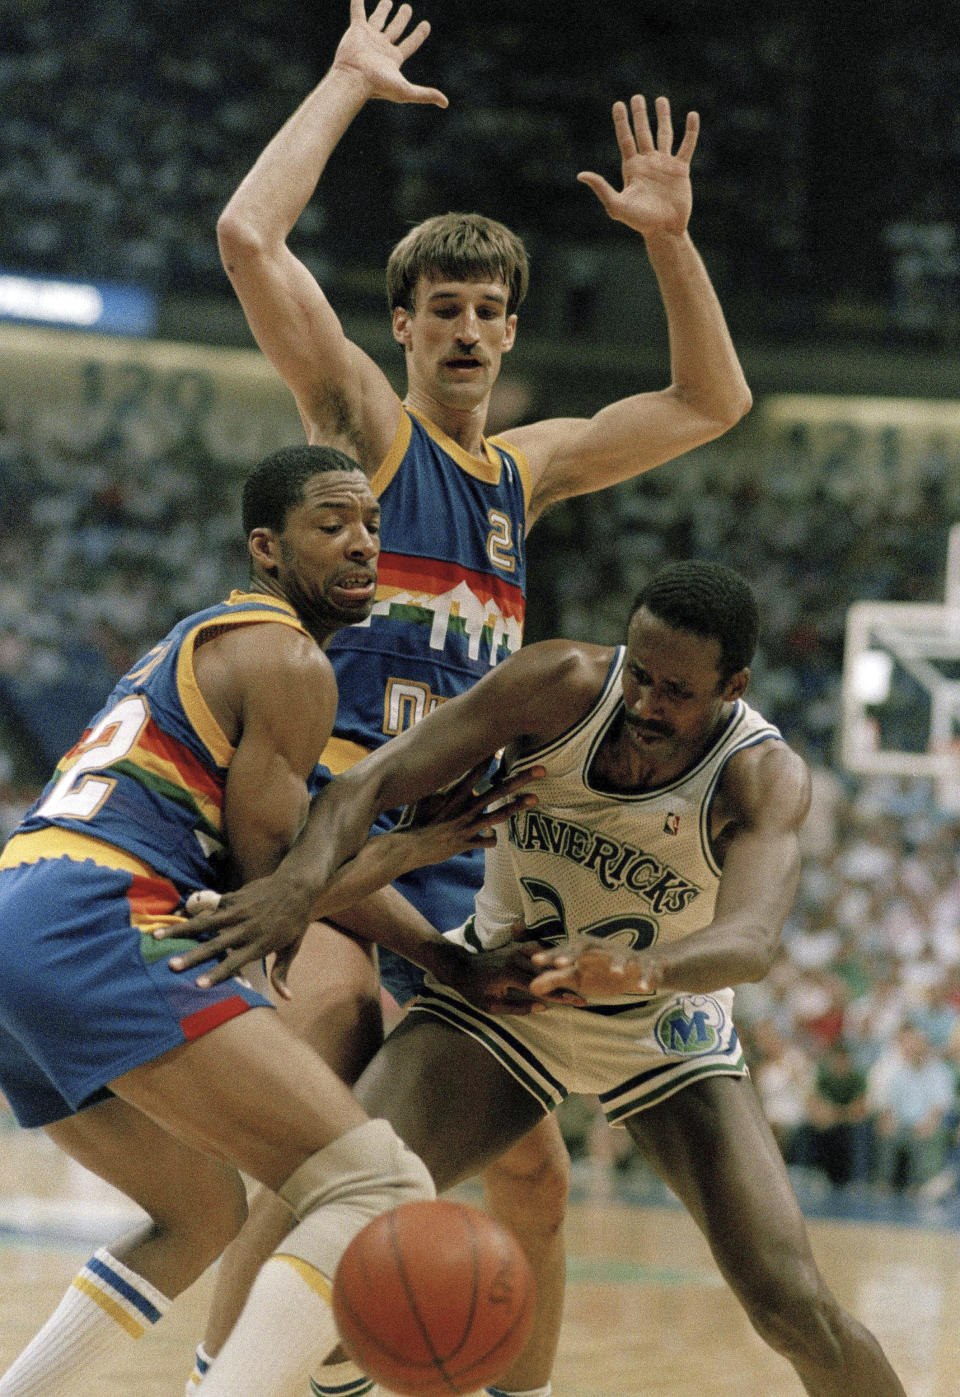 FILE - Denver Nuggets guard Lafayette Lever (12) and forward Bill Henzlik (24) prevent Dallas Mavericks guard Rolando Blackman (22) from going for the basket during an NBA basketball game in Dallas, May 14, 1988. Now, with the Nuggets the top-seed in the Western Conference, Denver has never seemed to be mistaken for much beyond an NBA novelty. And if there really is gold at the end of all those rainbows, a real Nuggets fan will have to see it to believe it. (AP Photo/Pat Sullivan, File)